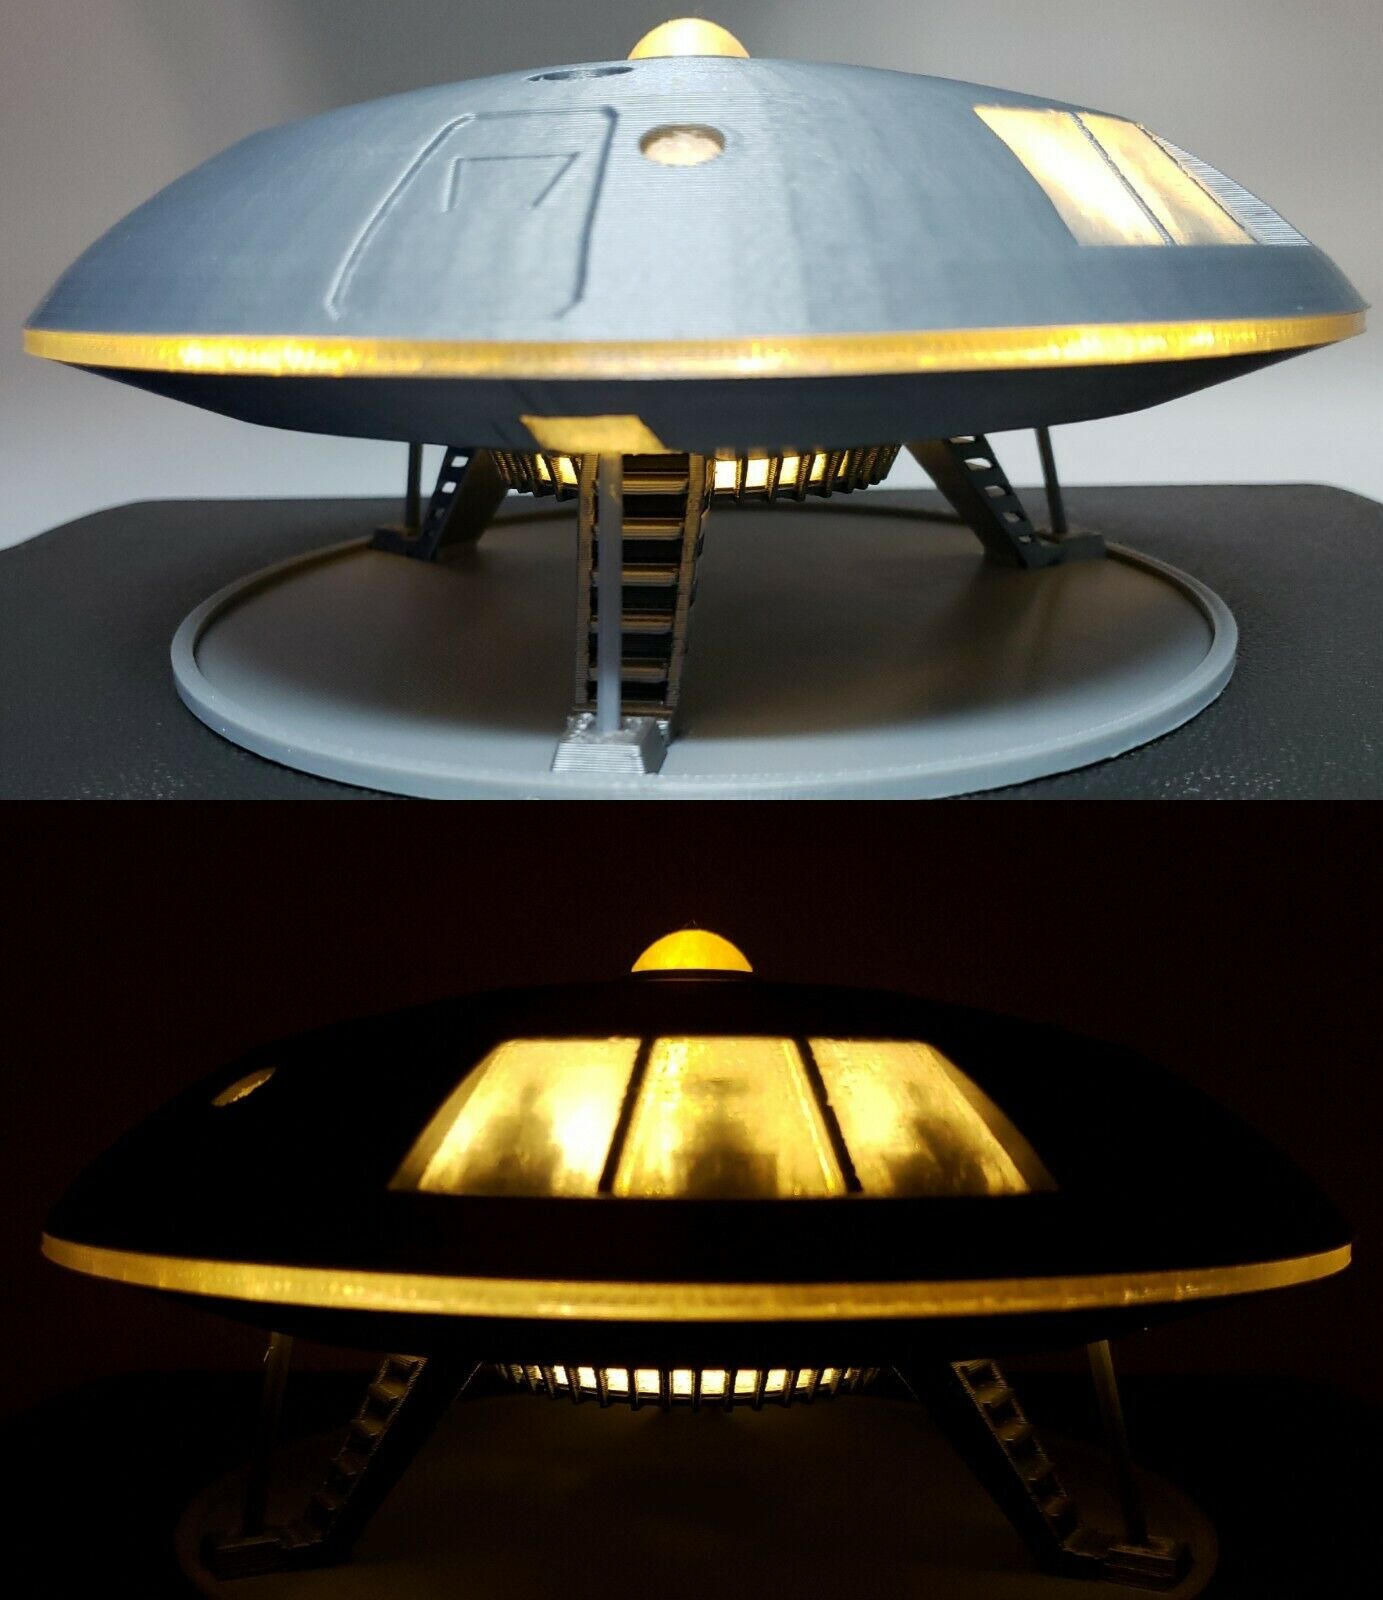 Jupiter 2 [from Lost in Space] - Large - includes battery-powered lights